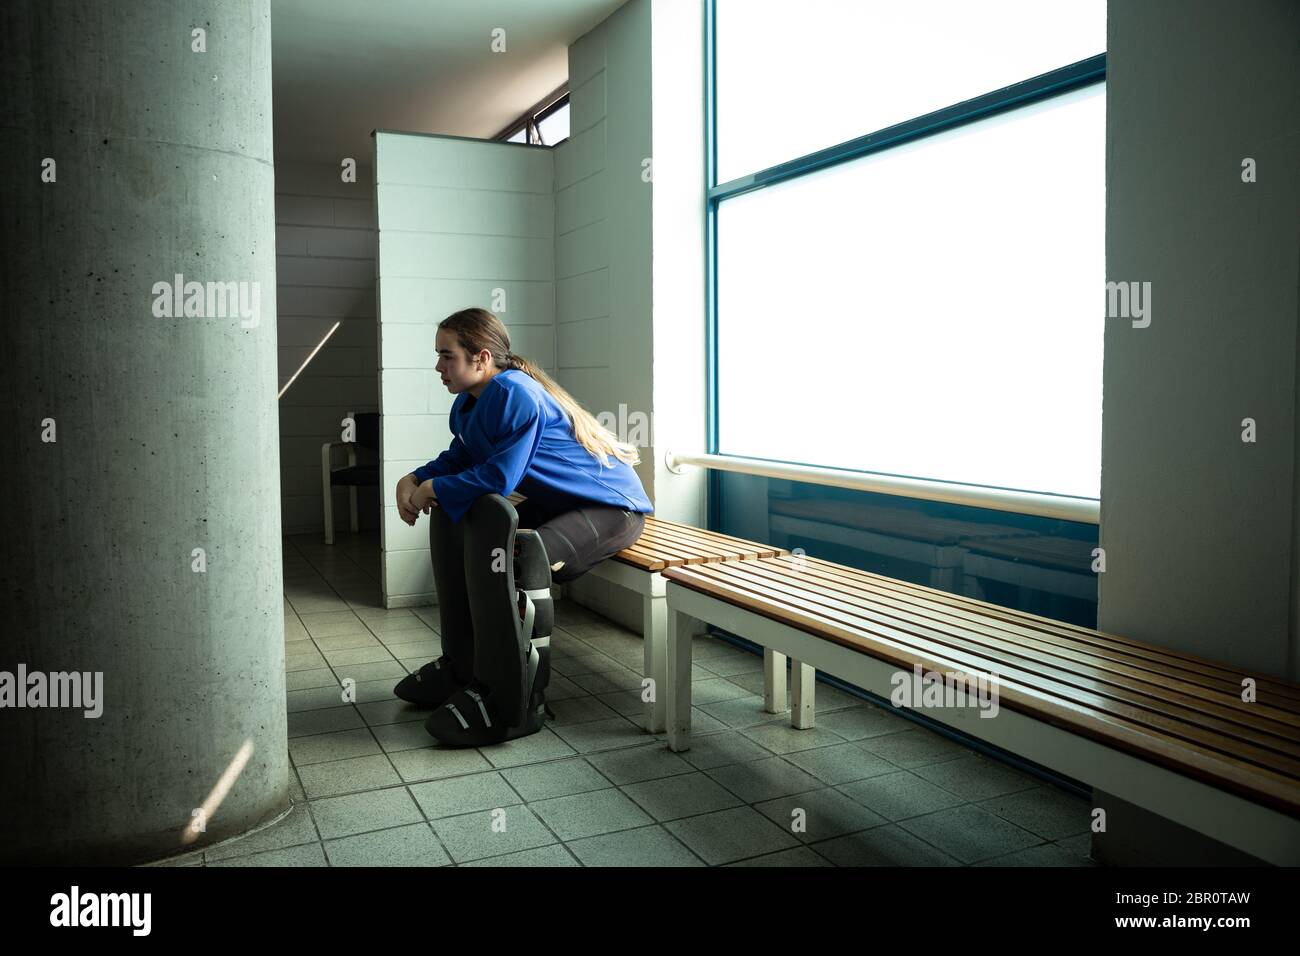 Female hockey player in a cloakroom Stock Photo